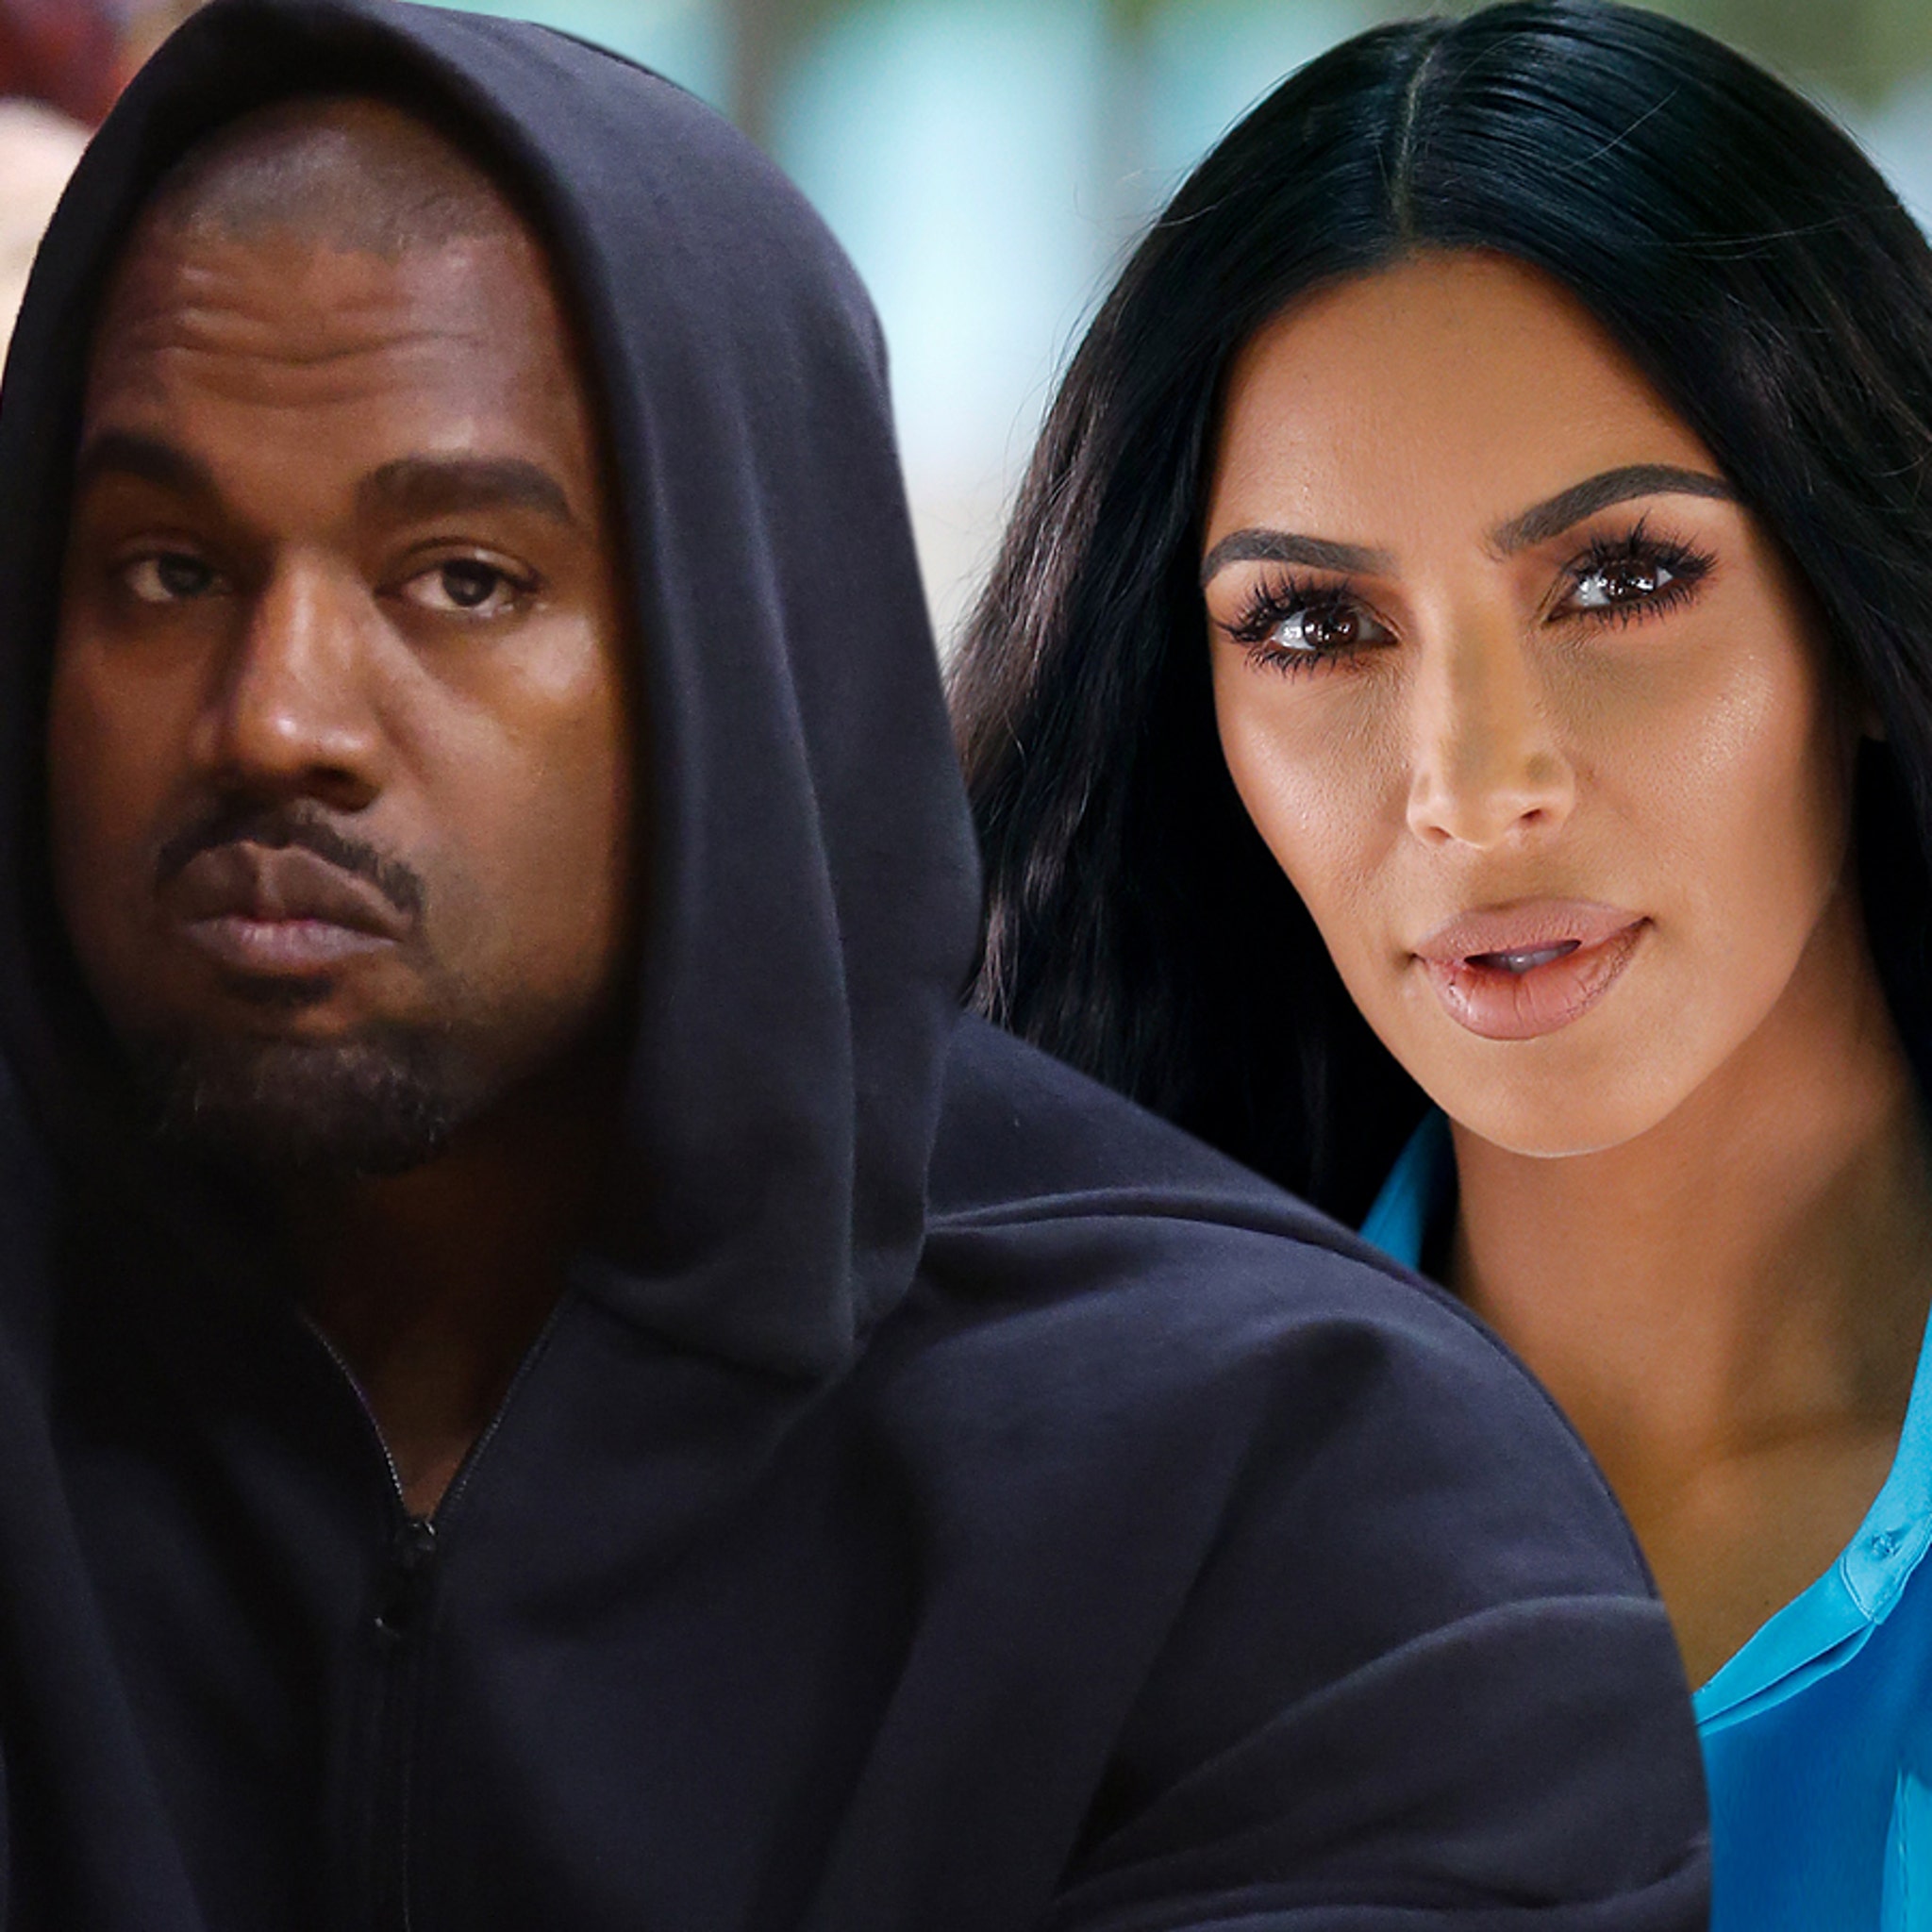 Son Is Sperm Doner For Mom Video - Kanye West Goes After Kim Kardashian and Family, Calls Himself a Sperm Donor